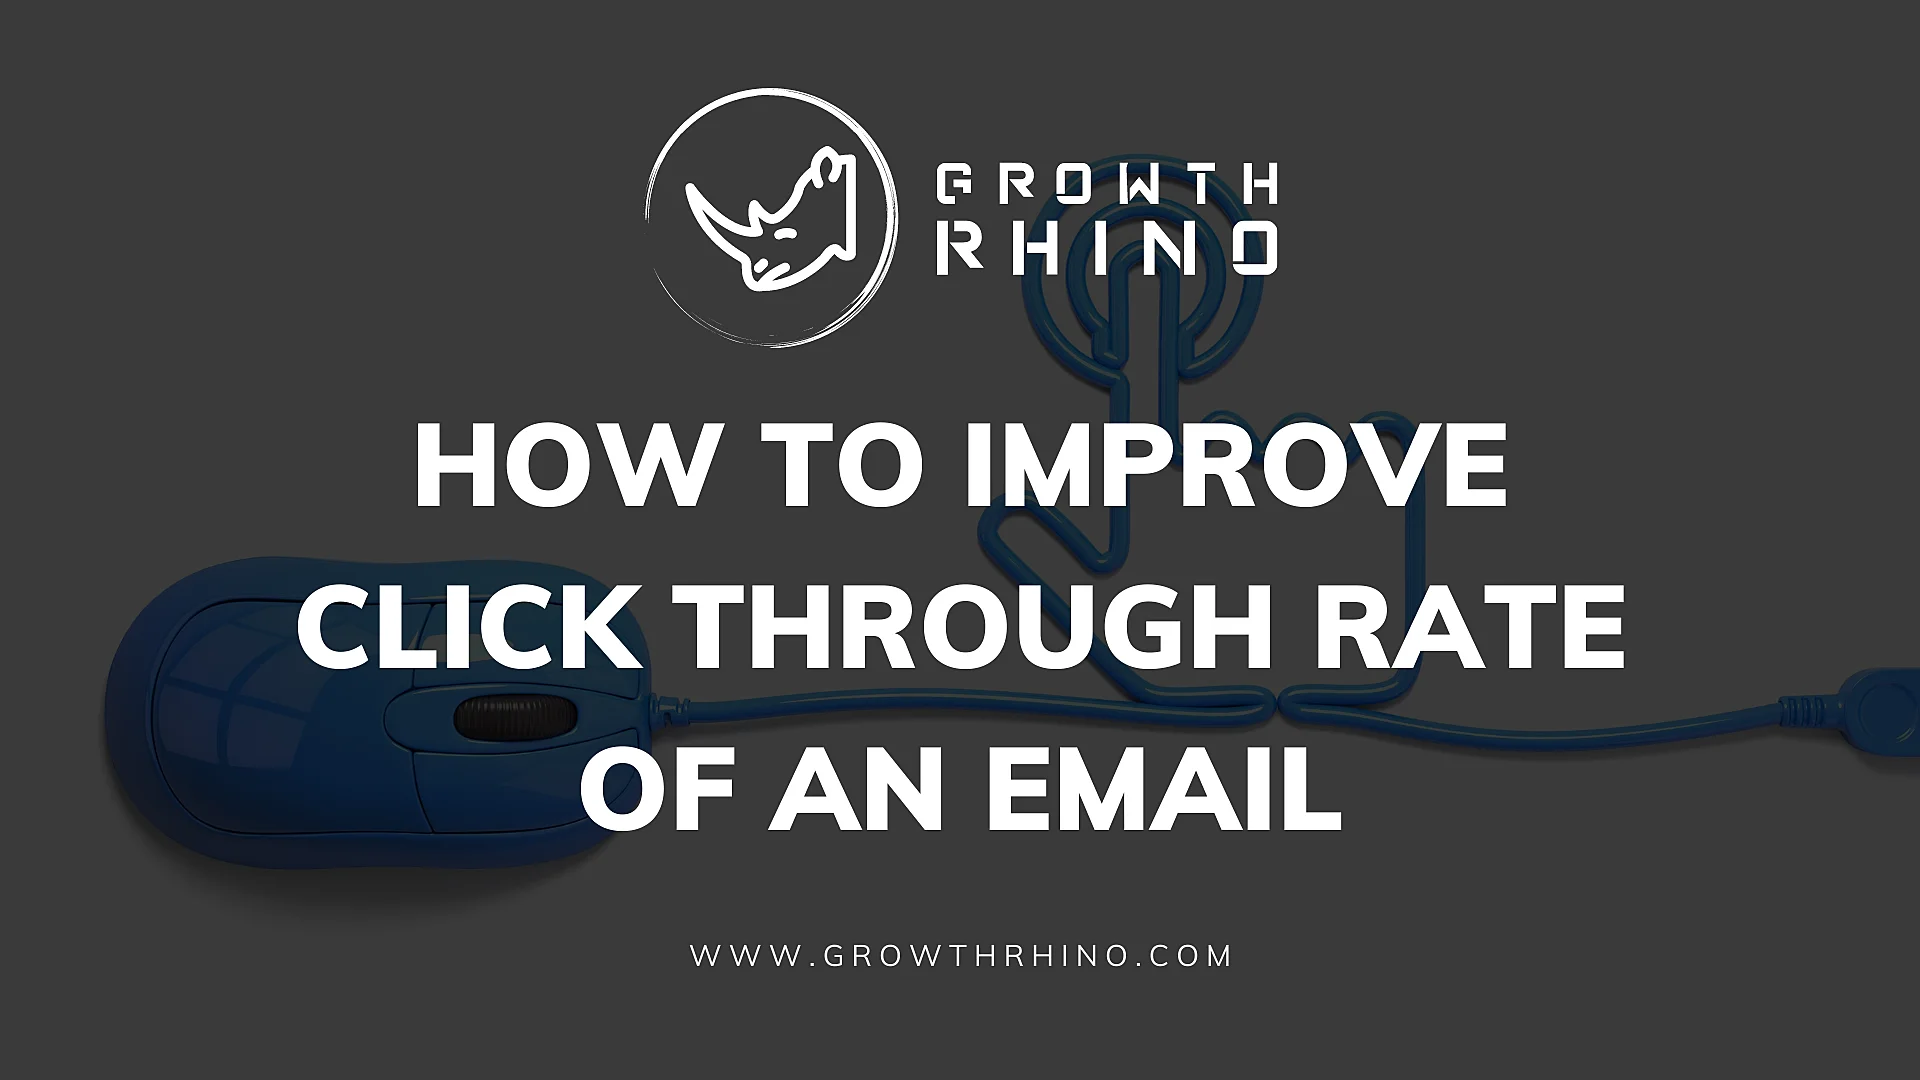 How to Improve Click Through Rate of an Email